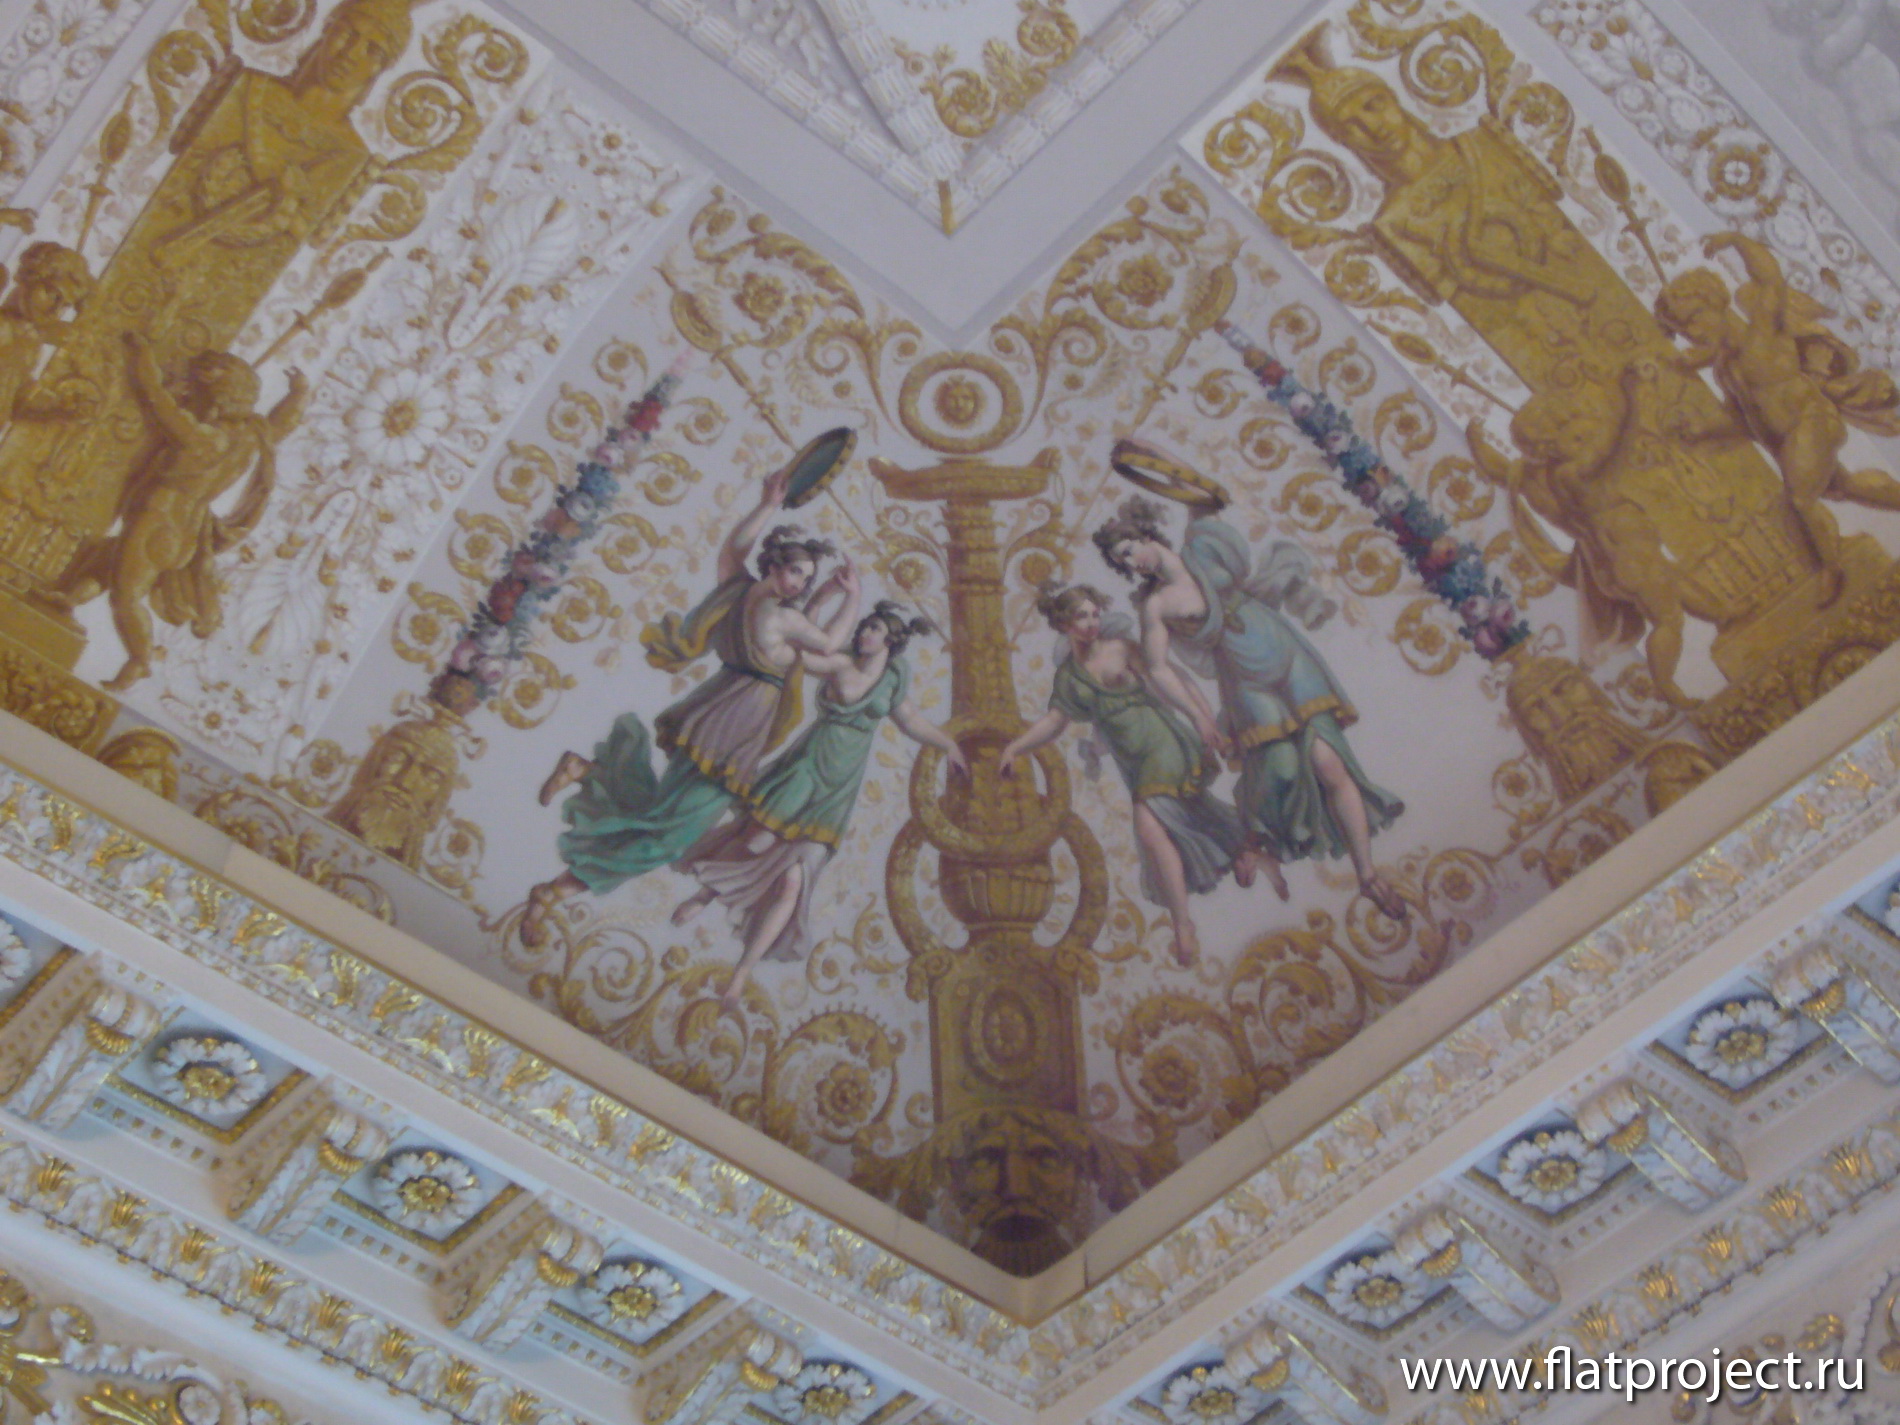 The State Russian museum interiors – photo 9